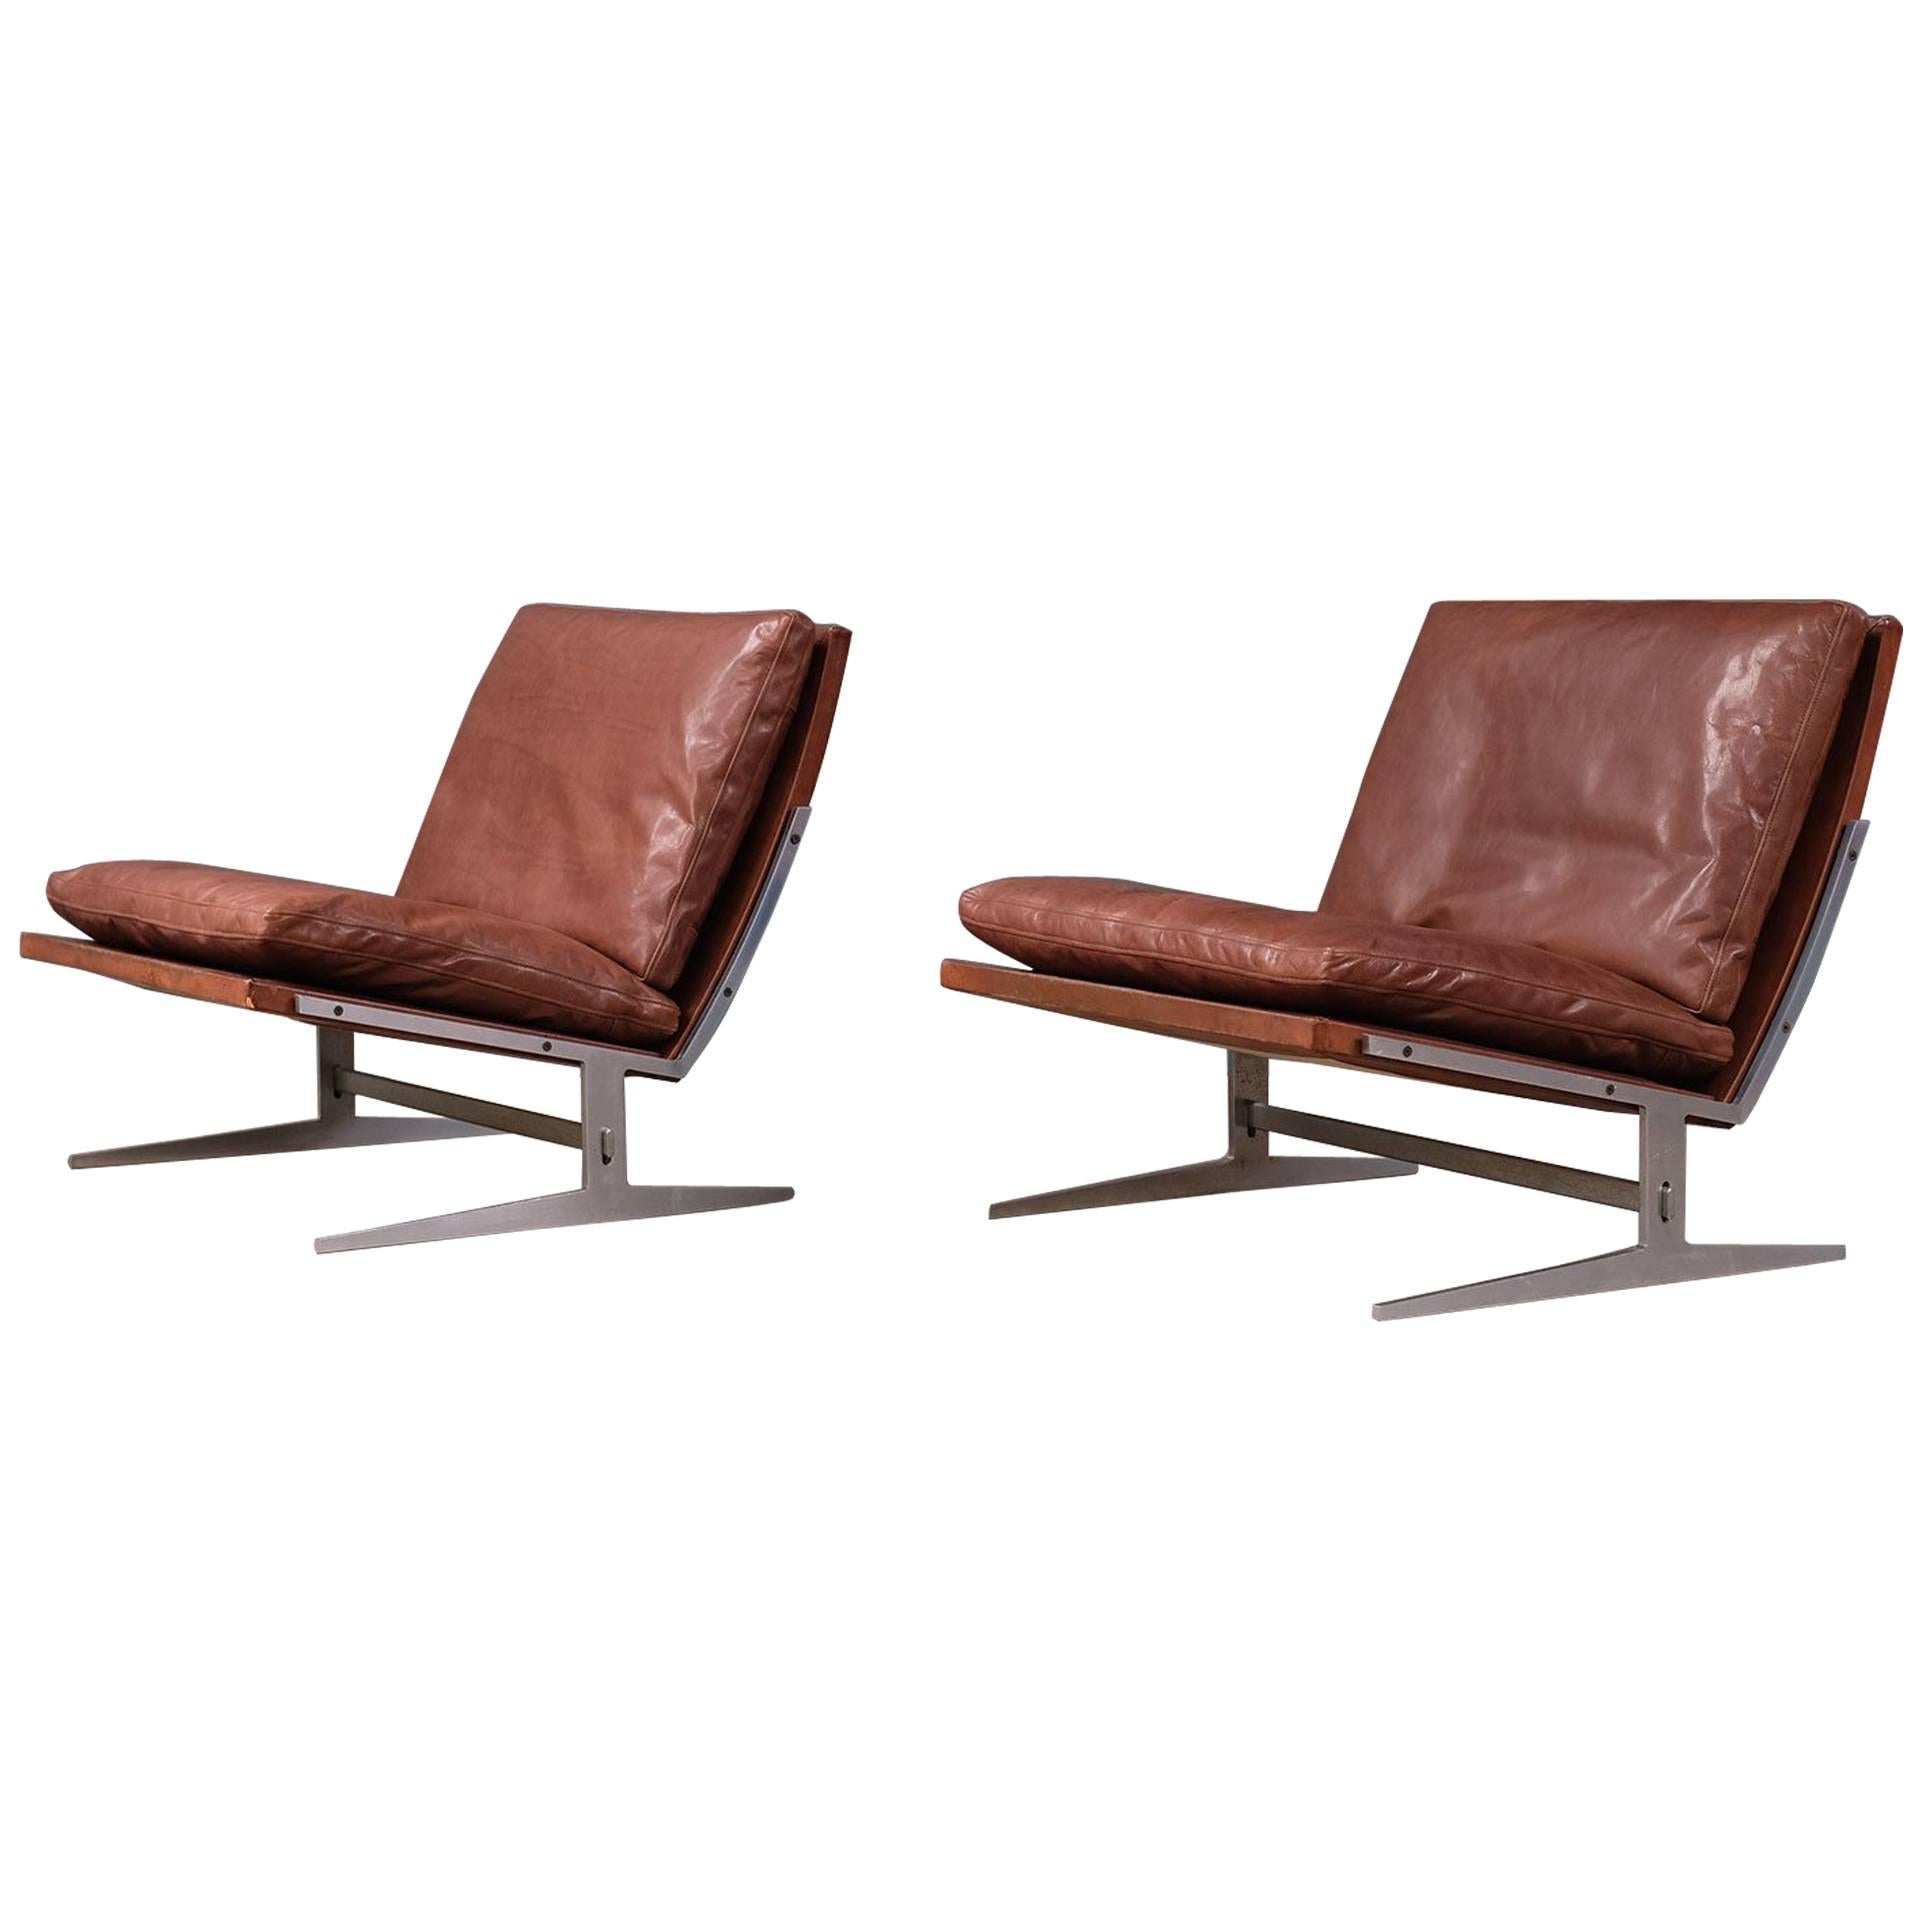 Fabricius Kastholm BO561 Lounge Chairs